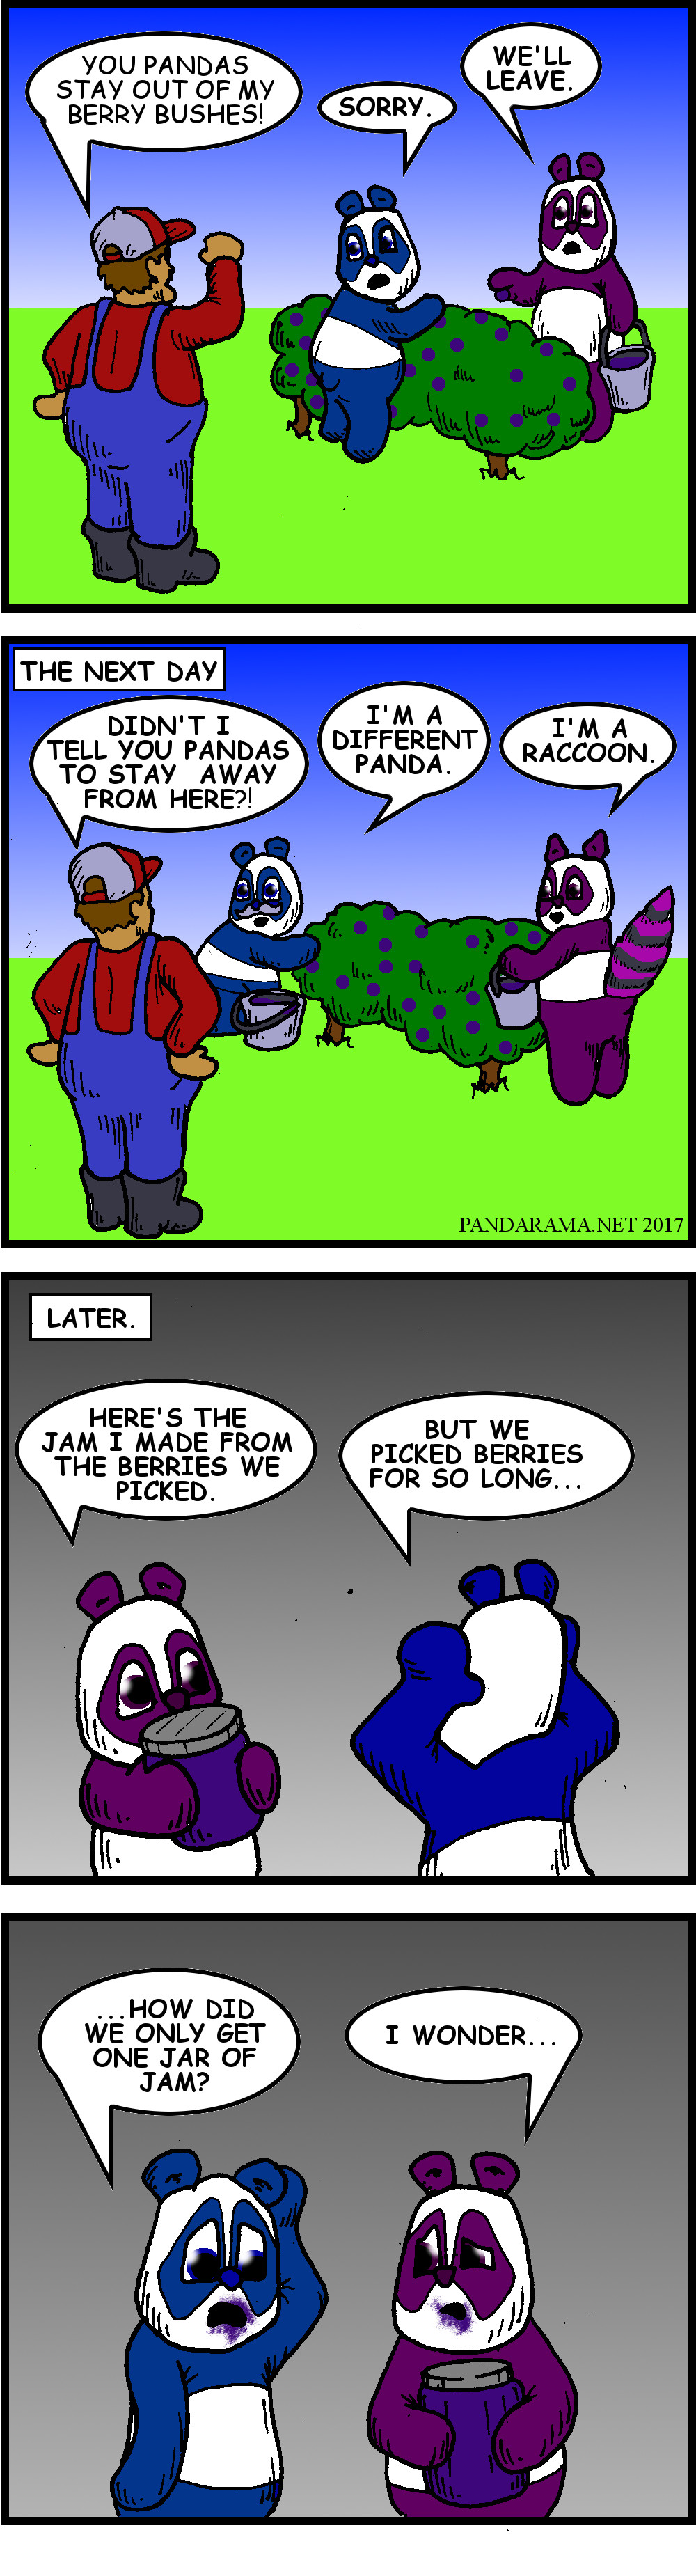 webcomic of pandas attempting to trick a farmer to pick more berries, despite their efforts they only get one jar of jam because they ate so many berries while picking. berrypicking cartoon. berry picking cartoon. foraging webcomic.